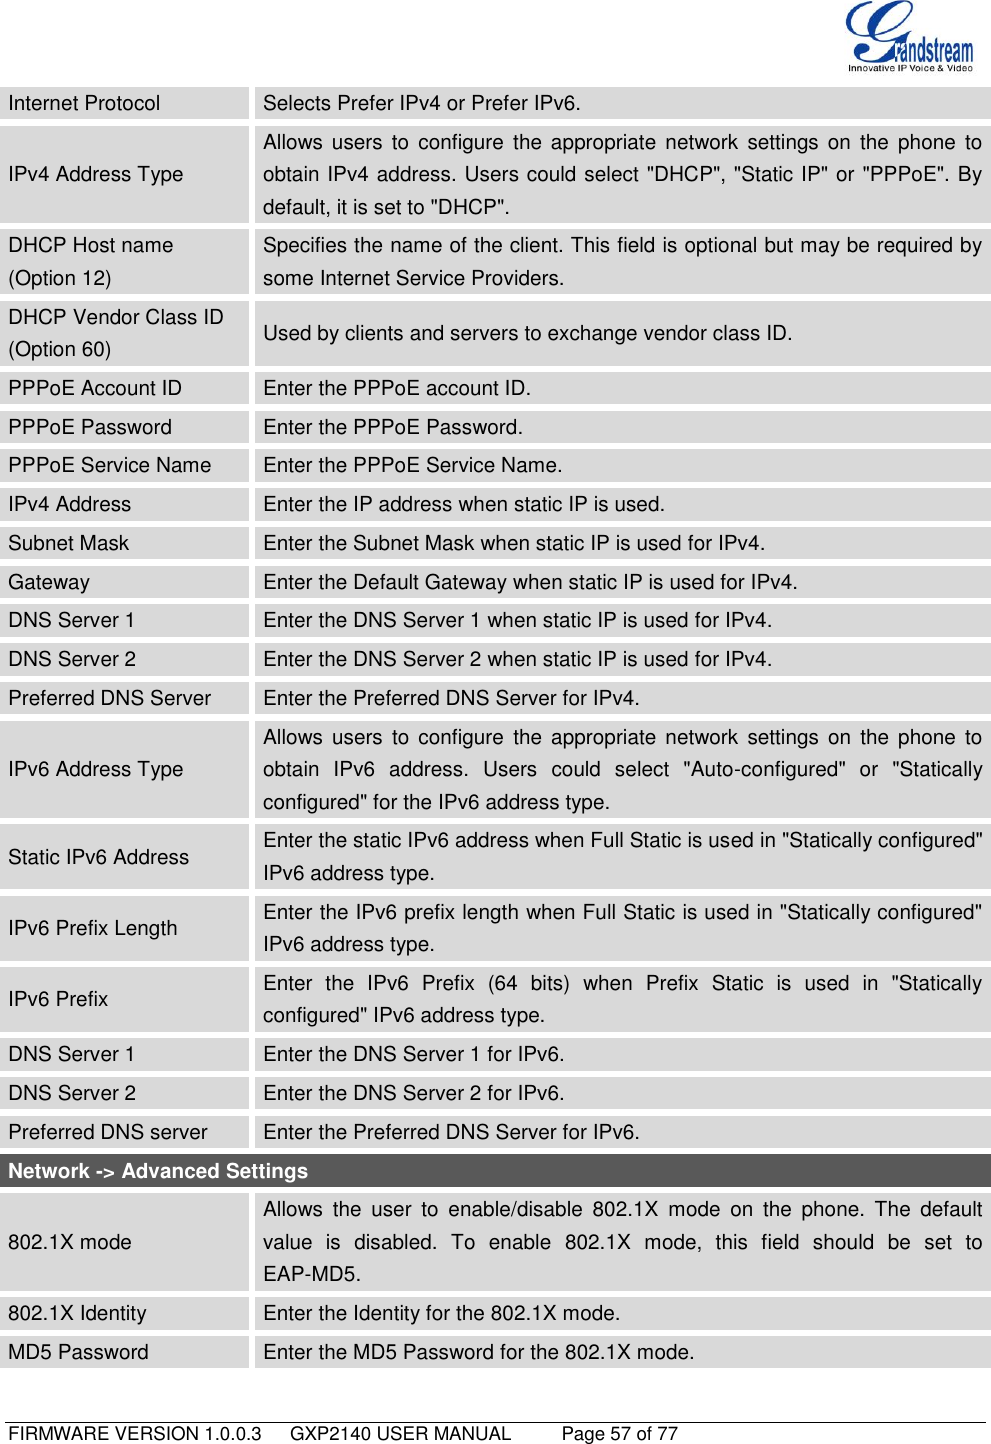   FIRMWARE VERSION 1.0.0.3   GXP2140 USER MANUAL     Page 57 of 77                                   Internet Protocol Selects Prefer IPv4 or Prefer IPv6. IPv4 Address Type Allows  users  to  configure  the  appropriate  network  settings  on  the  phone  to obtain IPv4 address. Users could select &quot;DHCP&quot;, &quot;Static IP&quot; or &quot;PPPoE&quot;. By default, it is set to &quot;DHCP&quot;. DHCP Host name (Option 12) Specifies the name of the client. This field is optional but may be required by some Internet Service Providers.   DHCP Vendor Class ID   (Option 60) Used by clients and servers to exchange vendor class ID. PPPoE Account ID Enter the PPPoE account ID. PPPoE Password Enter the PPPoE Password. PPPoE Service Name Enter the PPPoE Service Name. IPv4 Address Enter the IP address when static IP is used. Subnet Mask Enter the Subnet Mask when static IP is used for IPv4. Gateway Enter the Default Gateway when static IP is used for IPv4. DNS Server 1 Enter the DNS Server 1 when static IP is used for IPv4. DNS Server 2 Enter the DNS Server 2 when static IP is used for IPv4. Preferred DNS Server Enter the Preferred DNS Server for IPv4. IPv6 Address Type Allows  users  to  configure  the  appropriate  network  settings  on  the  phone  to obtain  IPv6  address.  Users  could  select  &quot;Auto-configured&quot;  or  &quot;Statically configured&quot; for the IPv6 address type. Static IPv6 Address Enter the static IPv6 address when Full Static is used in &quot;Statically configured&quot; IPv6 address type. IPv6 Prefix Length Enter the IPv6 prefix length when Full Static is used in &quot;Statically configured&quot; IPv6 address type. IPv6 Prefix Enter  the  IPv6  Prefix  (64  bits)  when  Prefix  Static  is  used  in  &quot;Statically configured&quot; IPv6 address type. DNS Server 1 Enter the DNS Server 1 for IPv6. DNS Server 2 Enter the DNS Server 2 for IPv6. Preferred DNS server Enter the Preferred DNS Server for IPv6. Network -&gt; Advanced Settings 802.1X mode Allows  the  user  to  enable/disable  802.1X  mode  on  the  phone.  The  default value  is  disabled.  To  enable  802.1X  mode,  this  field  should  be  set  to EAP-MD5. 802.1X Identity Enter the Identity for the 802.1X mode. MD5 Password Enter the MD5 Password for the 802.1X mode. 